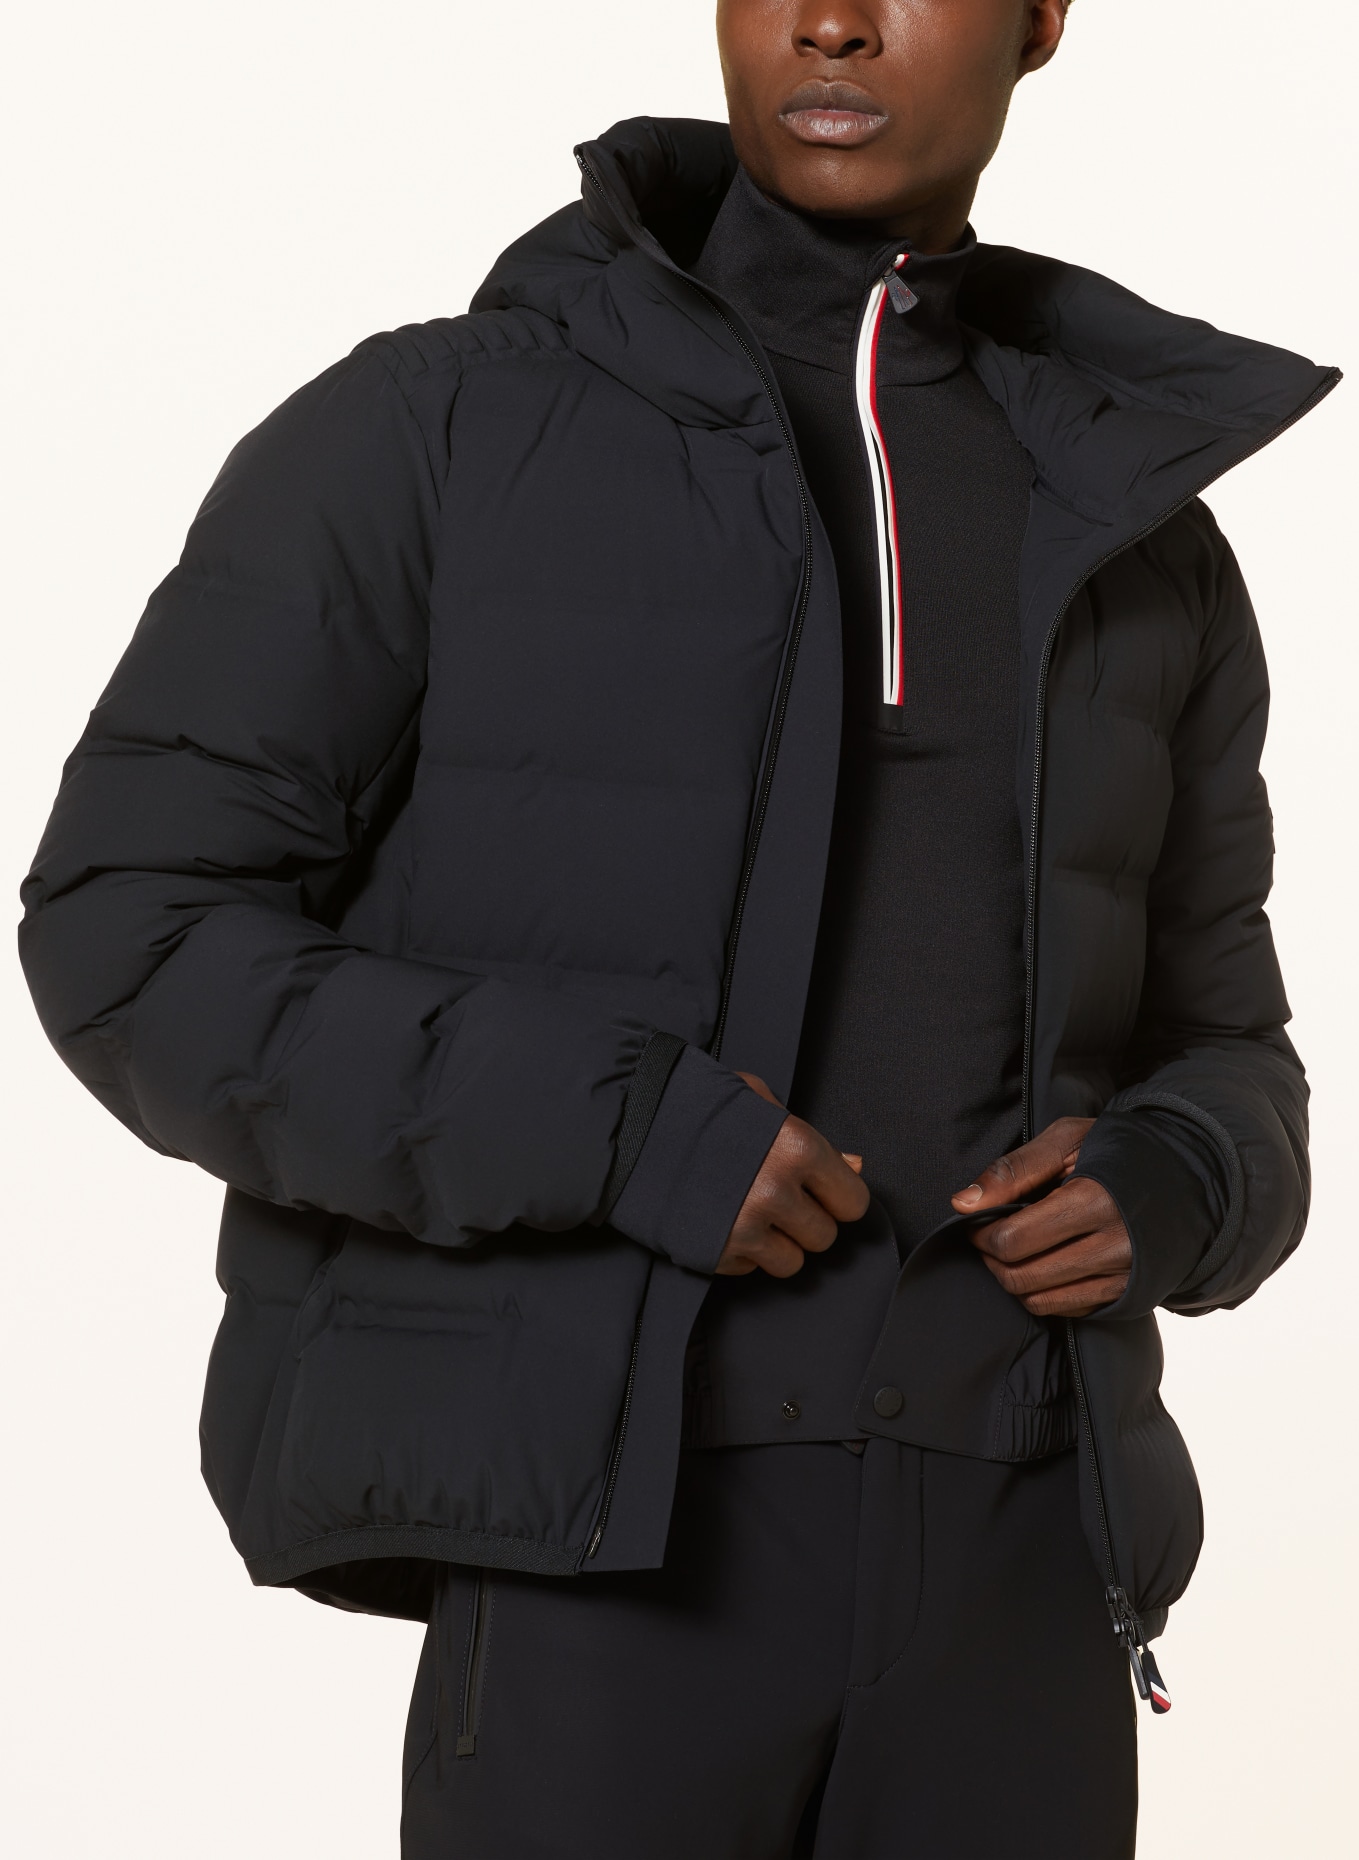 Black Lagorai hooded quilted down ski jacket, Moncler Grenoble